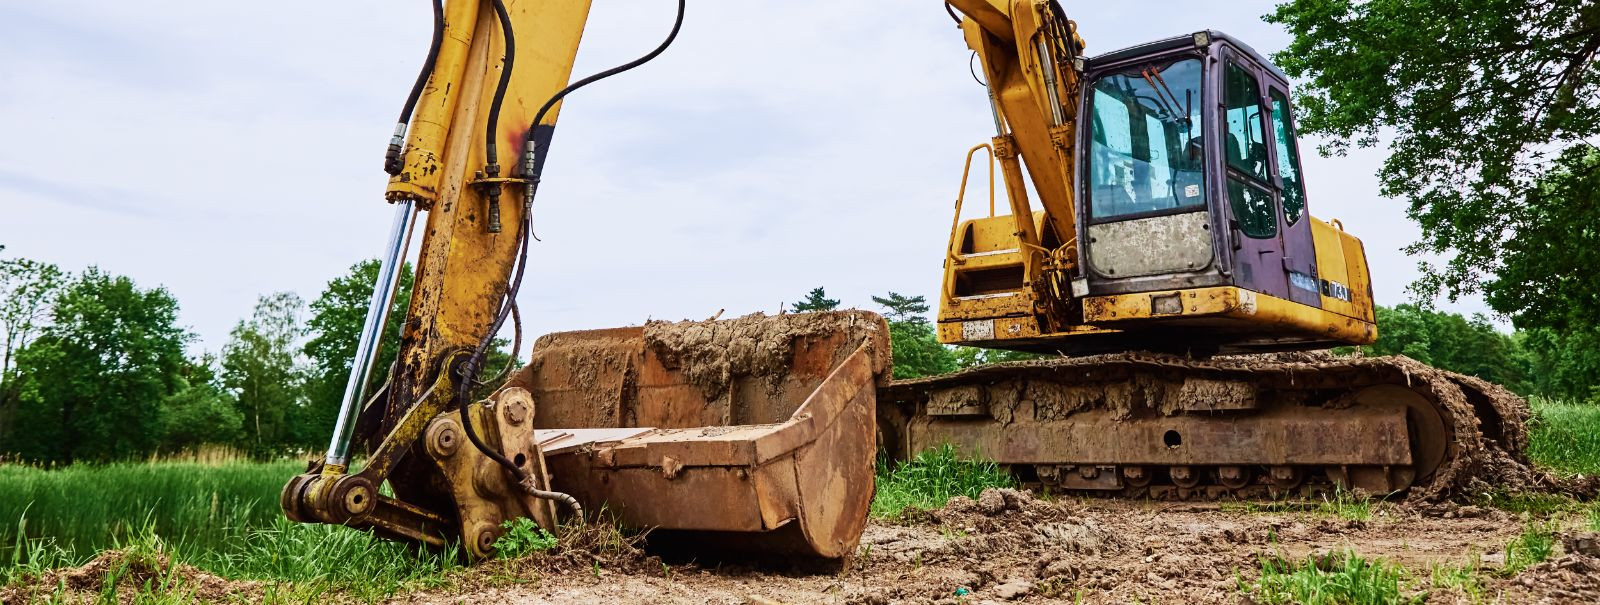 For construction companies, industrial enterprises, and property management firms, the decision between renting and buying construction equipment is pivotal. Th